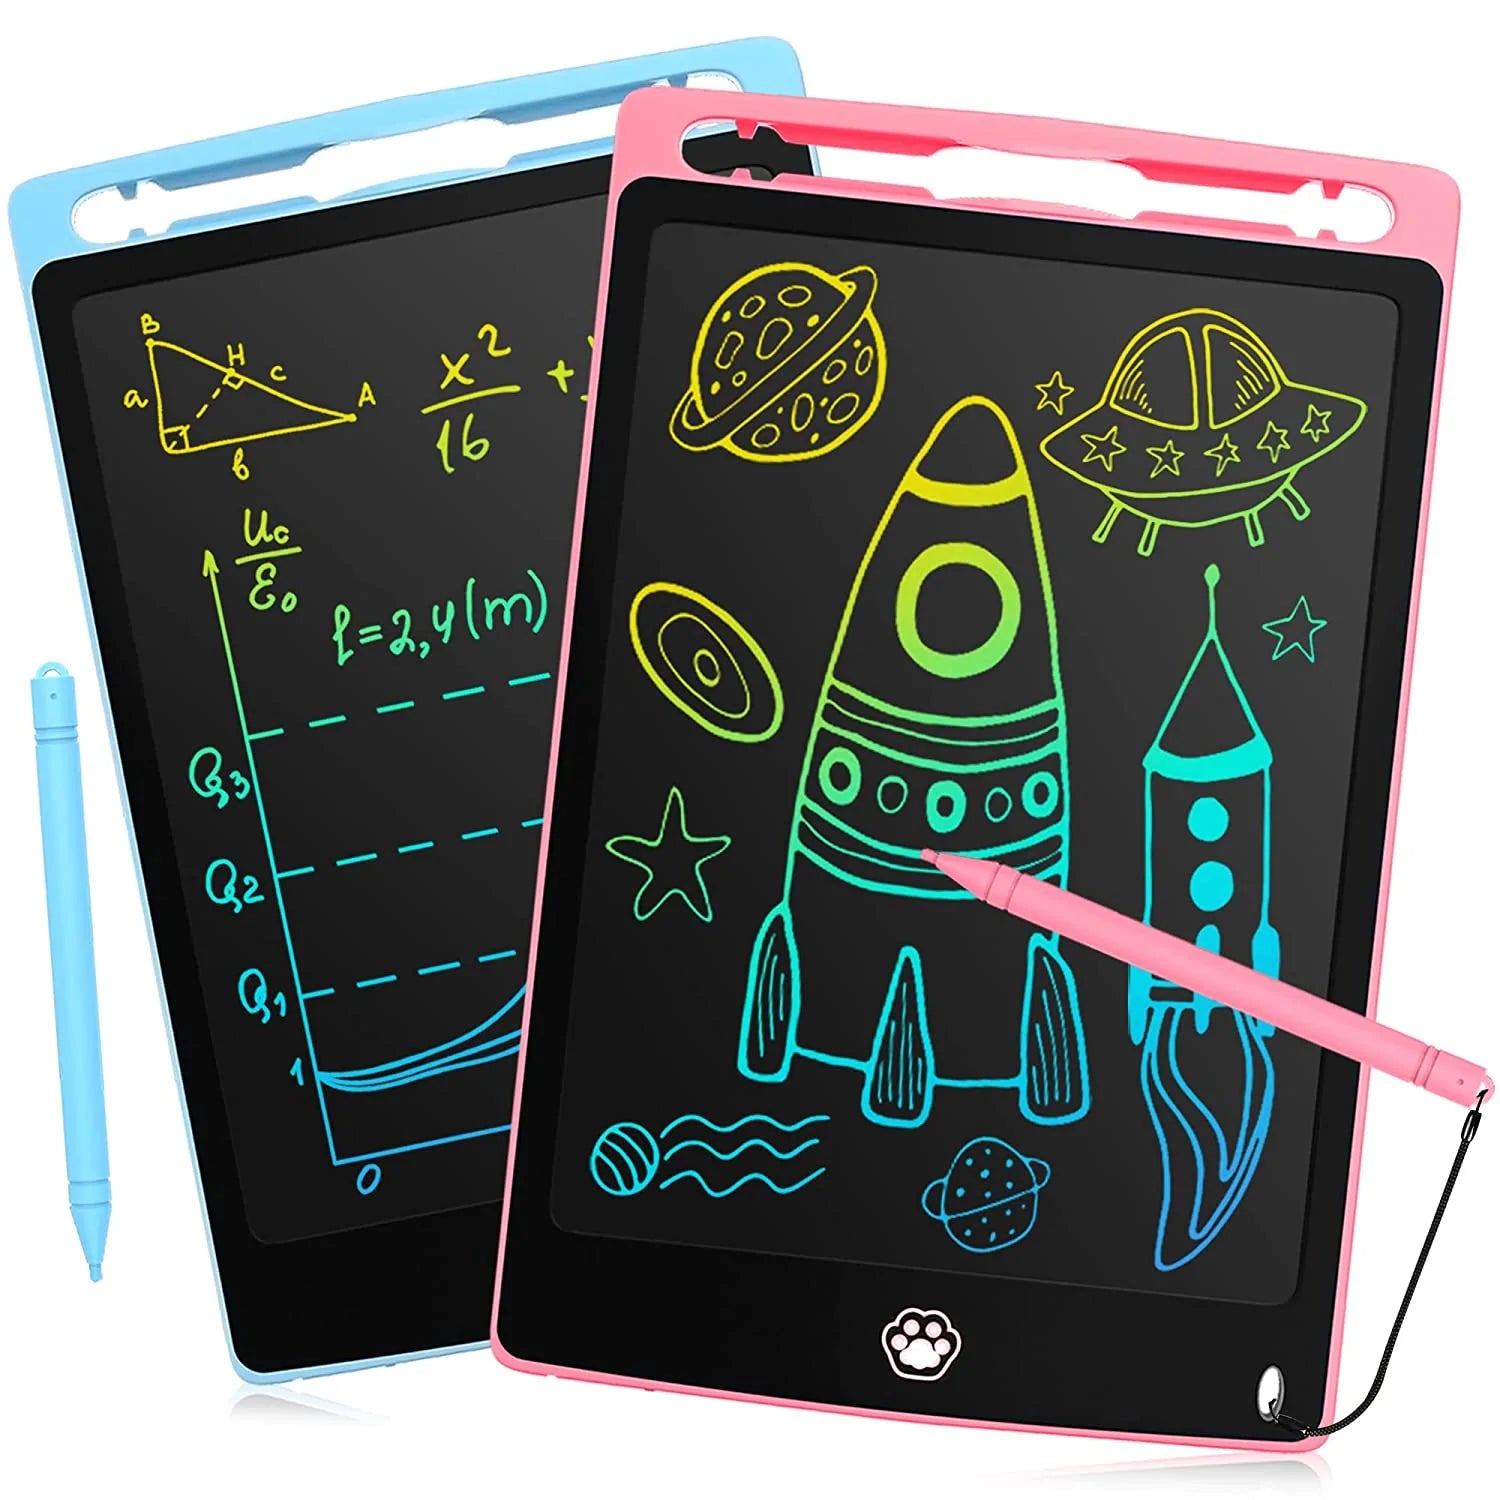 Wholesale 85 Electronic Drawing Board kids Writing Pad Digital Graphics  With Screen LCD Write Tablet Replace Paper Tablet From malibabacom